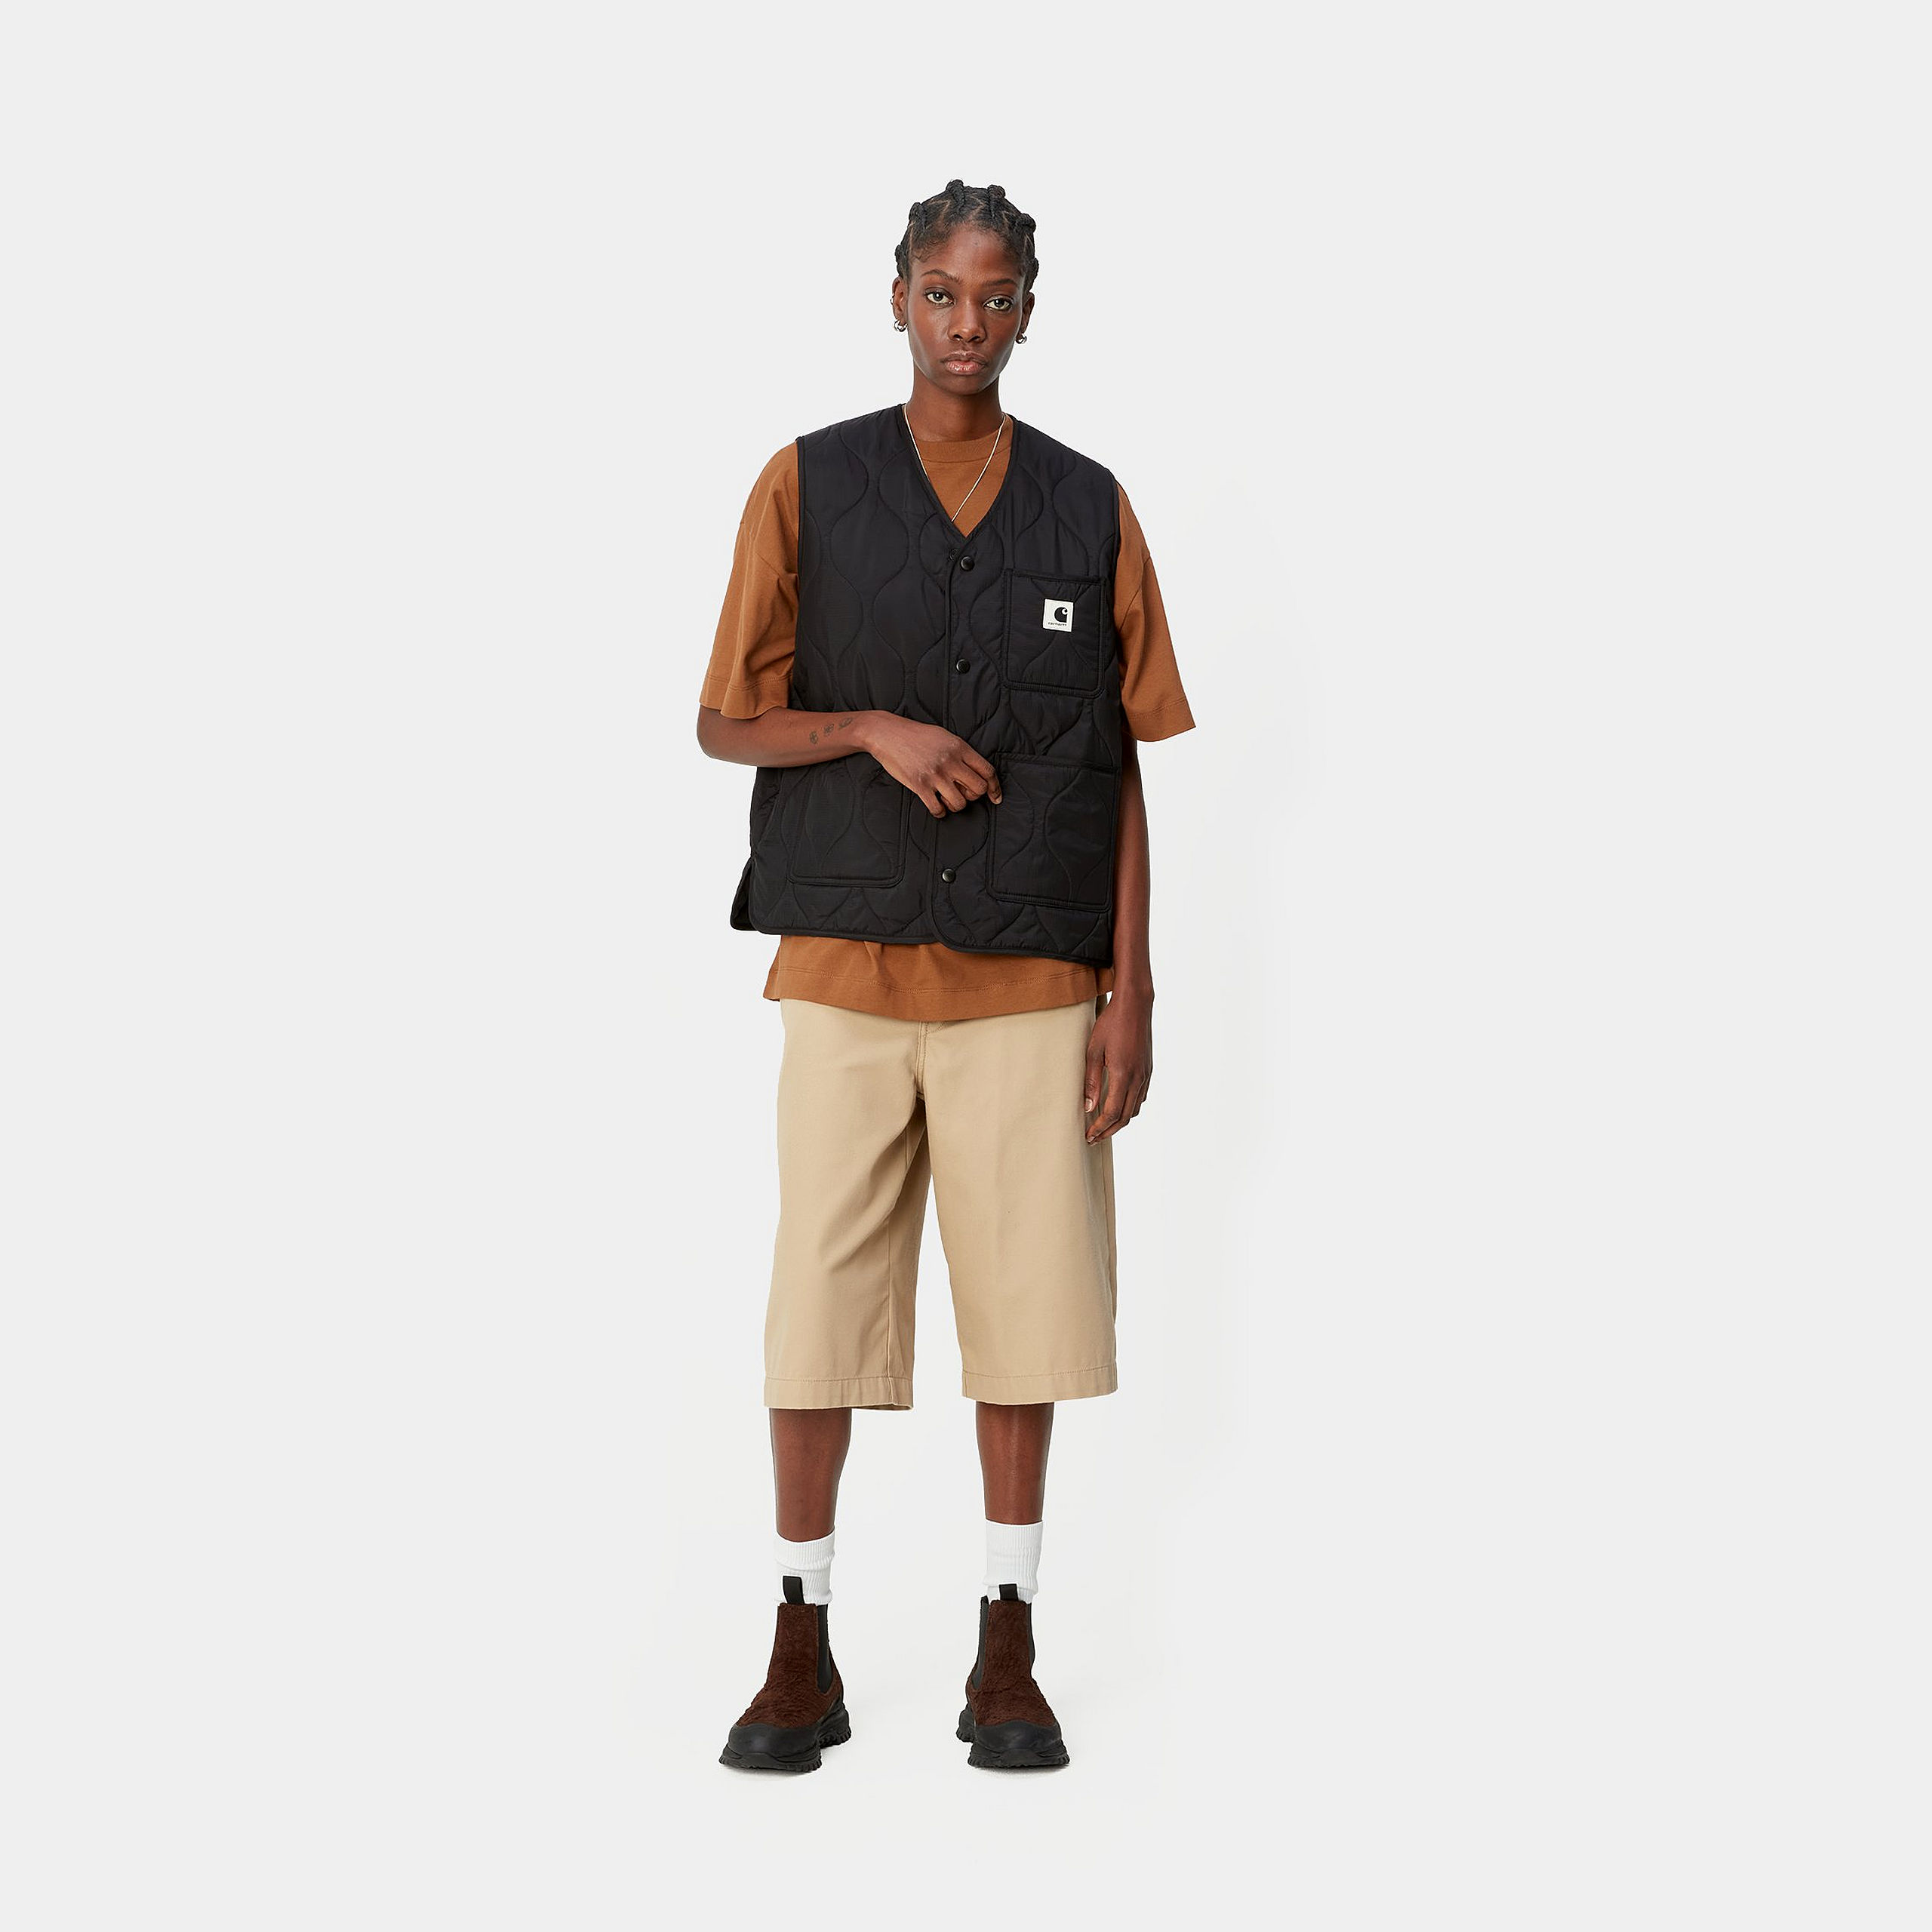 Carhartt WIP outfit